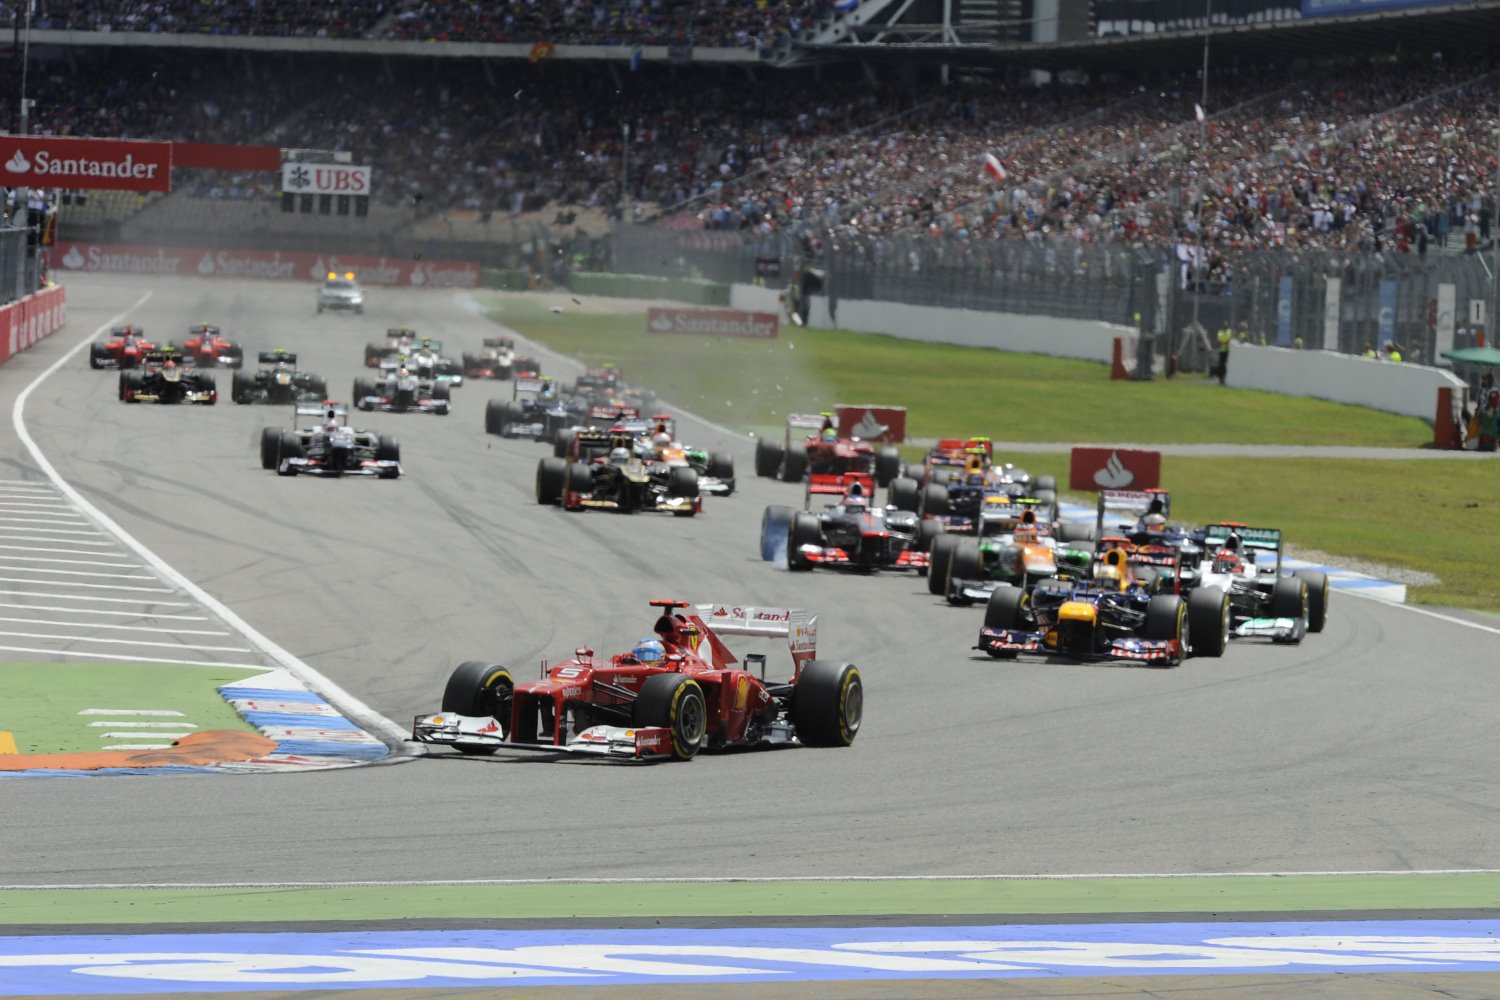 First Nurburgring, now Hockenheim - German fans have lost interest in F1. The scream is gone and so too is the excitement.